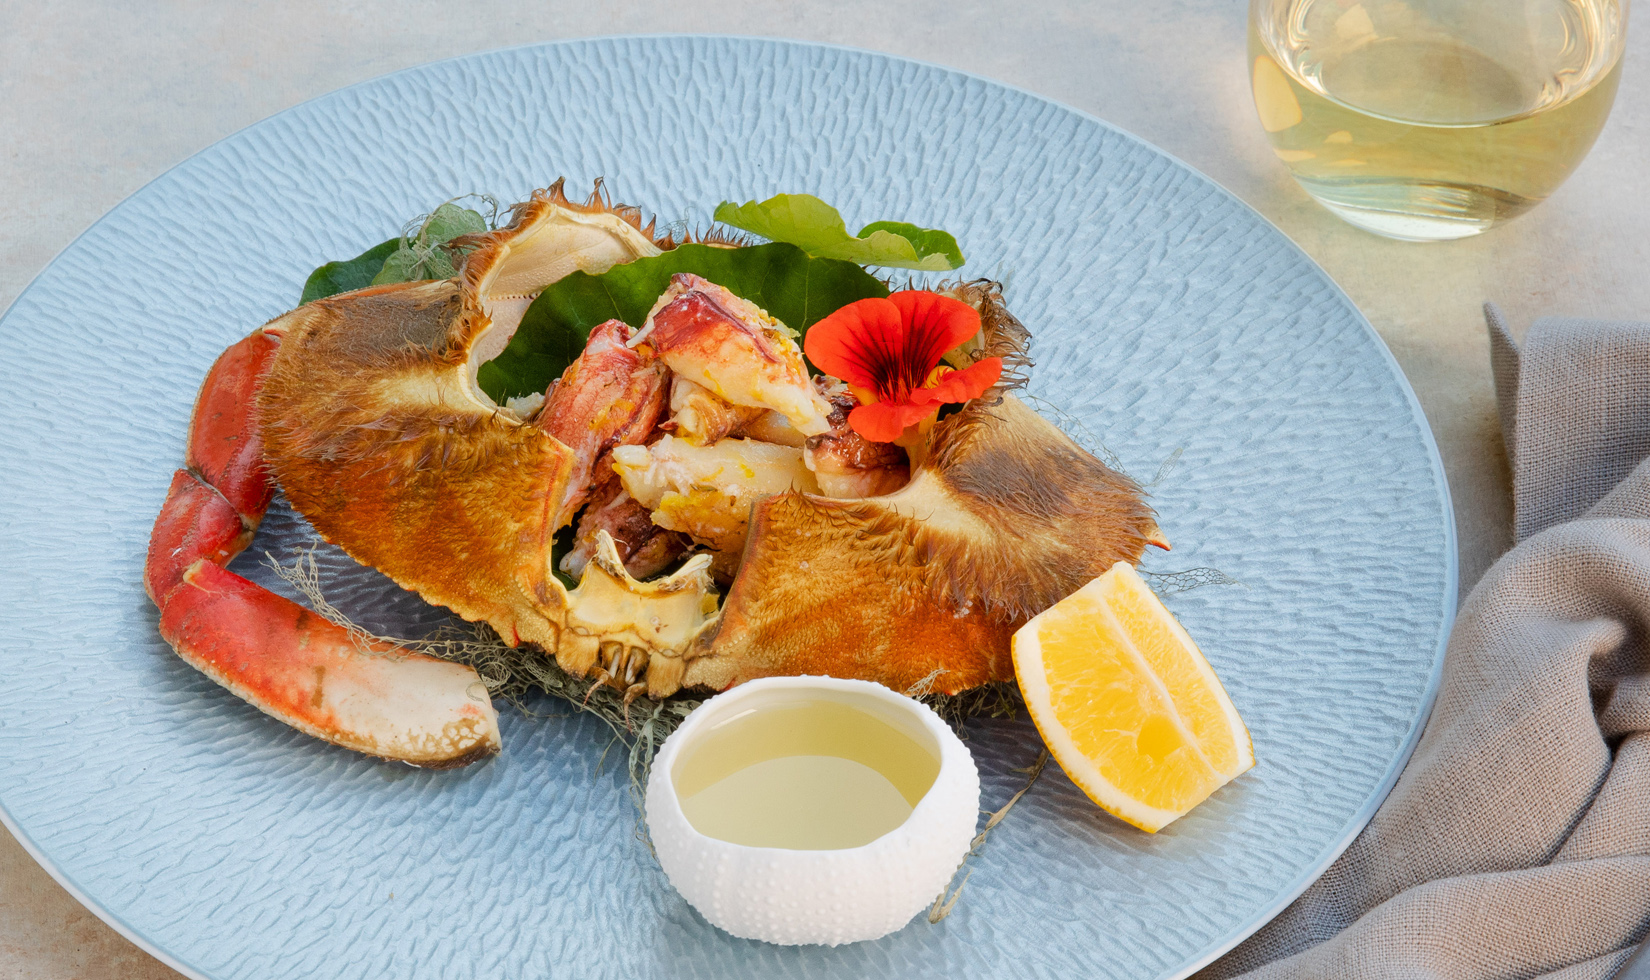 Dungeness crab with chardonnay drawn butter on blue plate with Jordan chardonnay glass